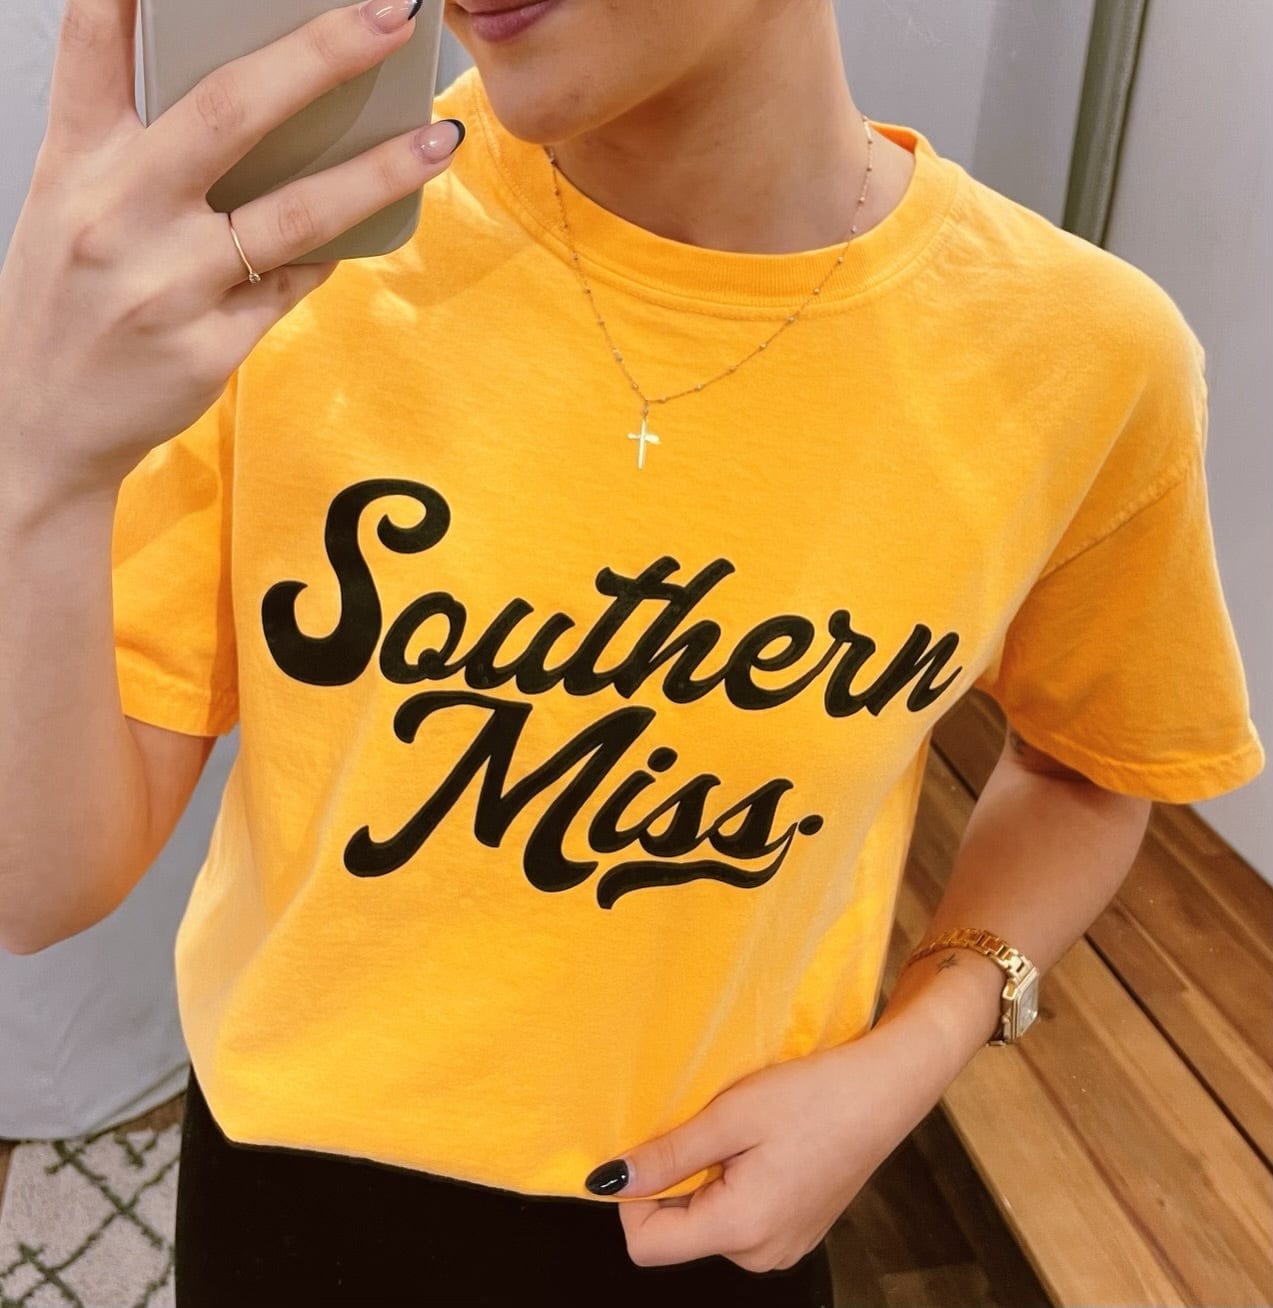 Southern Miss Tee